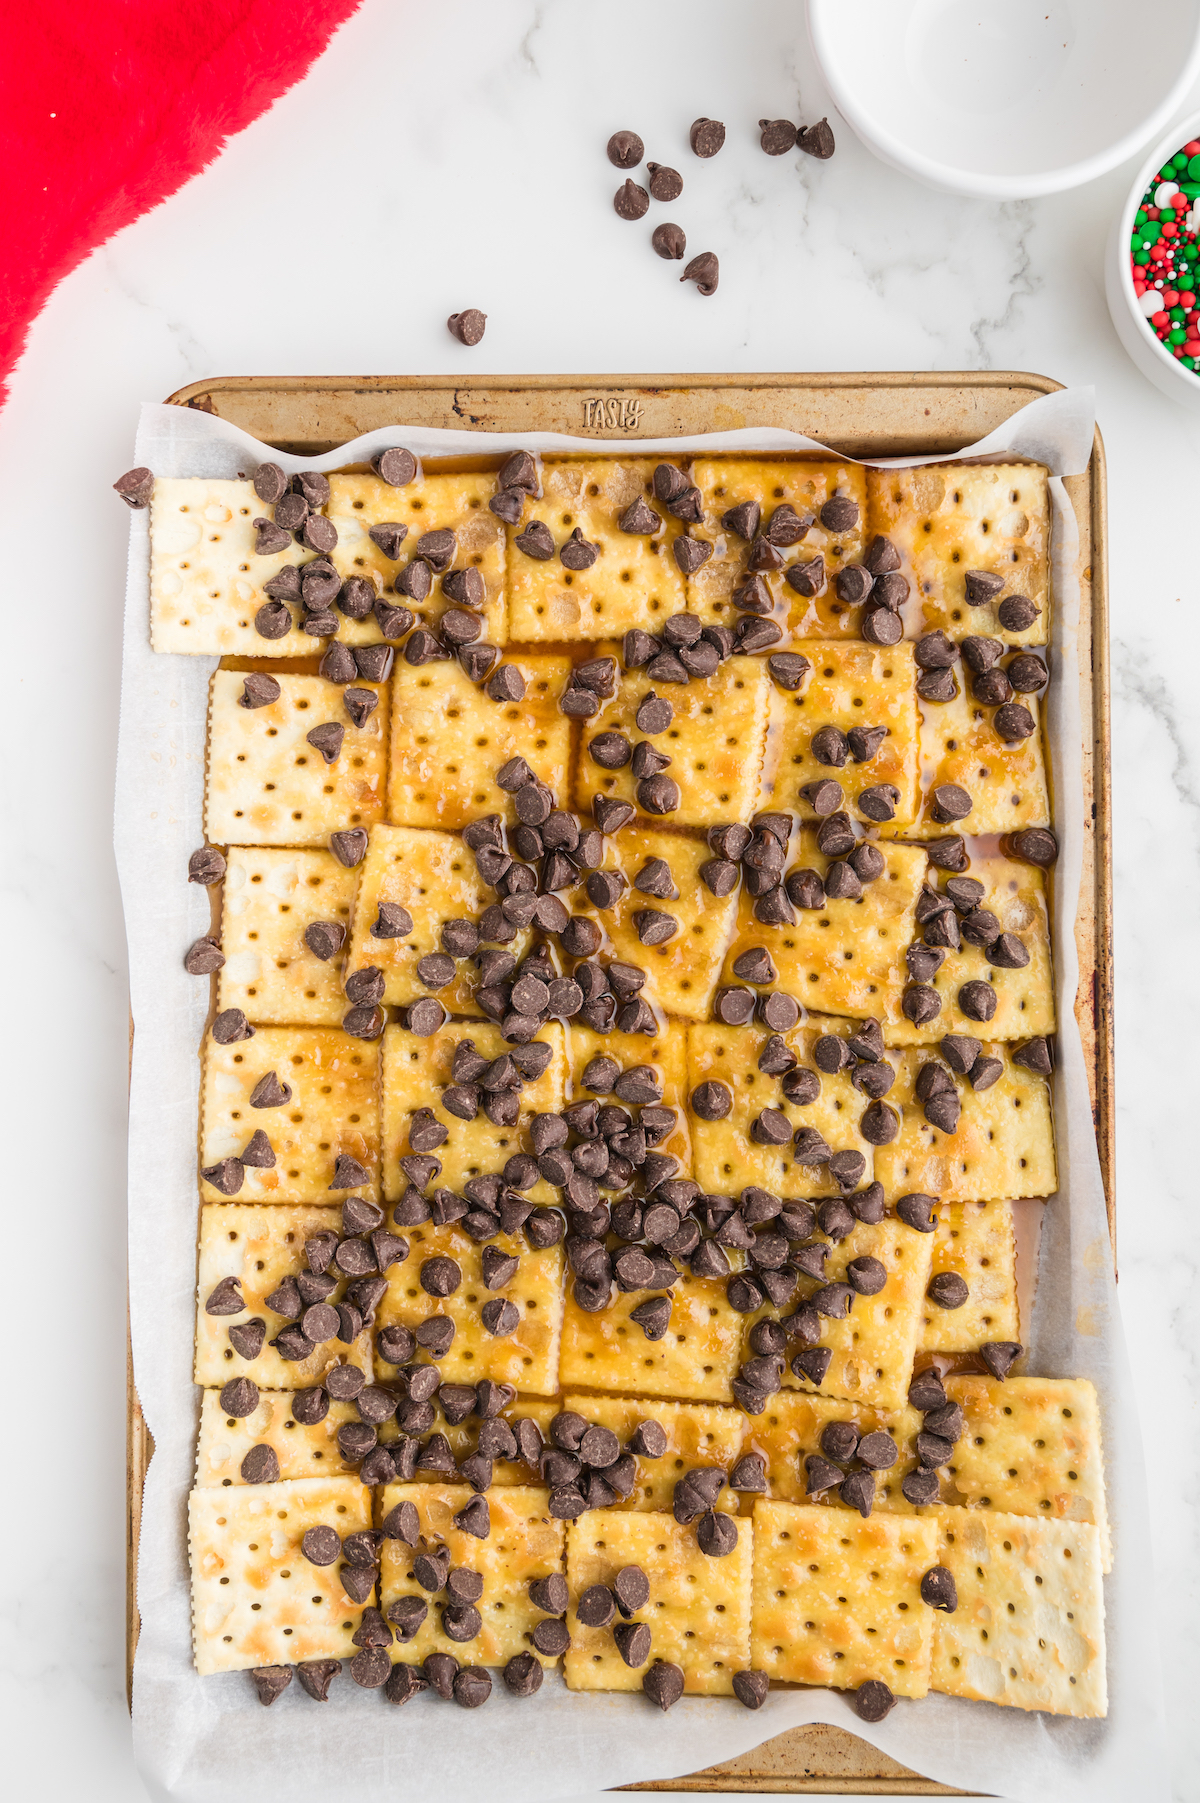 Milk chocolate chips spread over the saltines